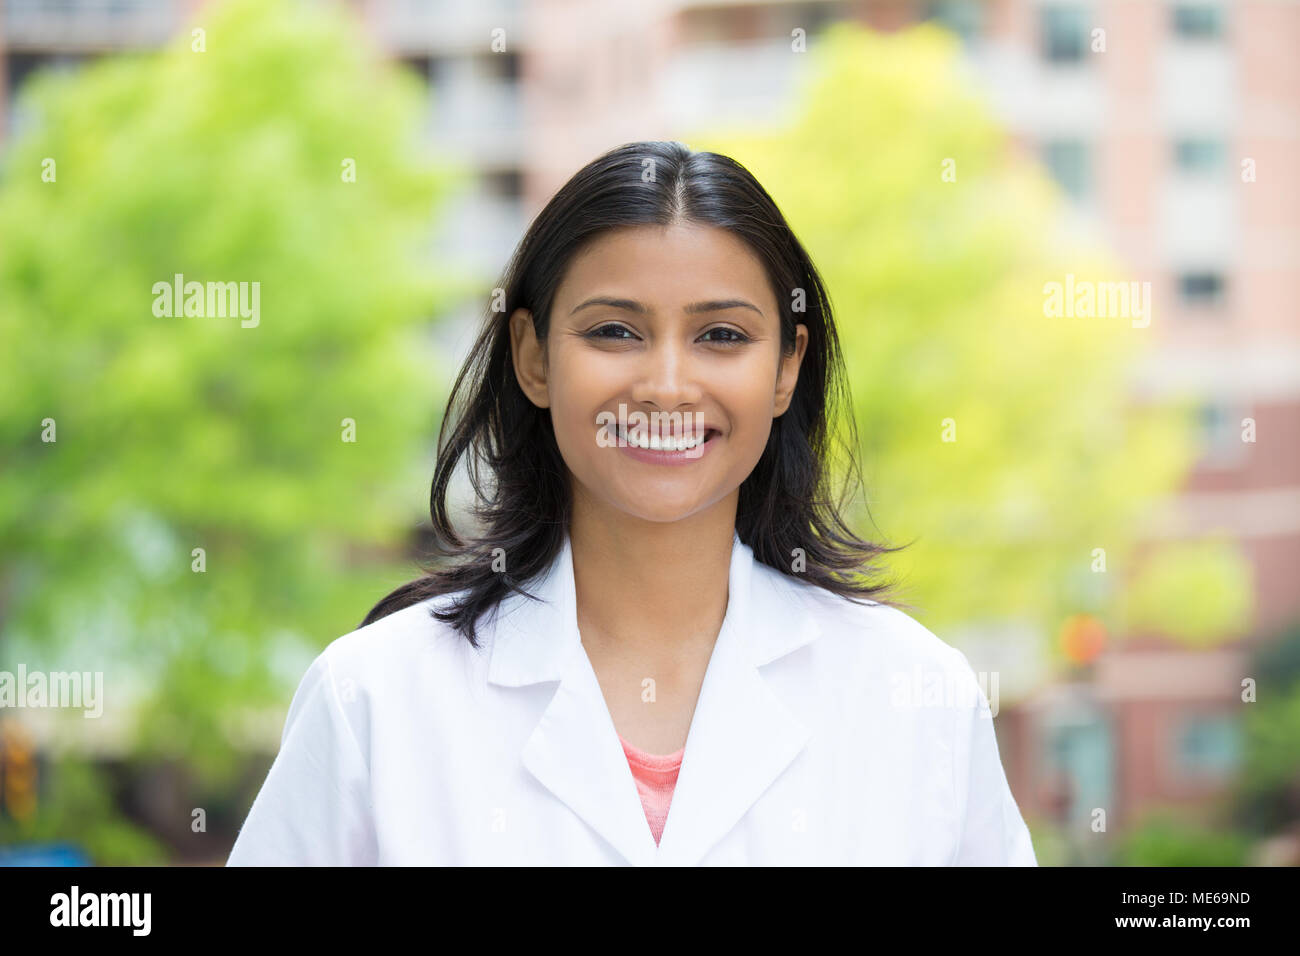 Closeup portrait of confident, smiling female health care professional in white lab coat, isolated background of blurred trees and buildings Stock Photo